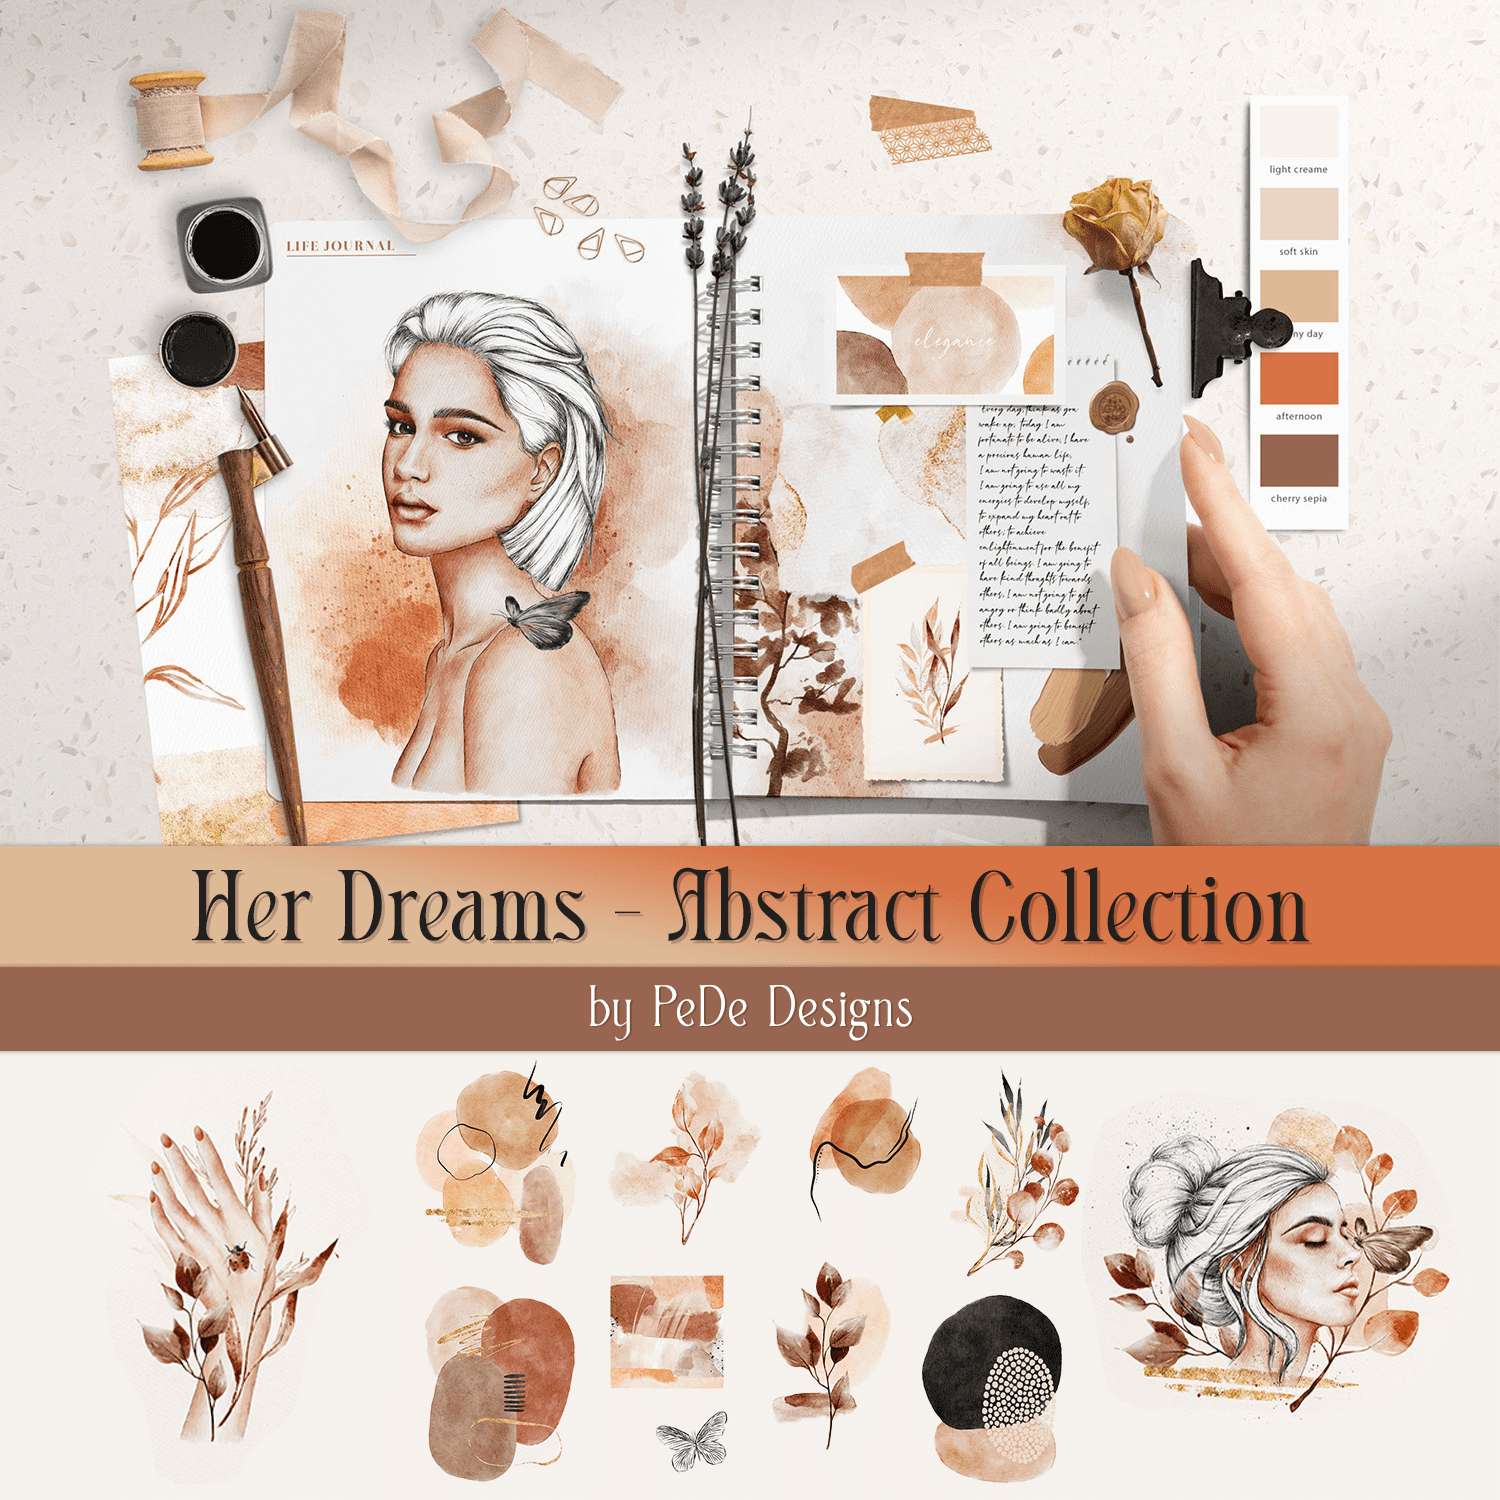 Her Dreams. Abstract Collection.